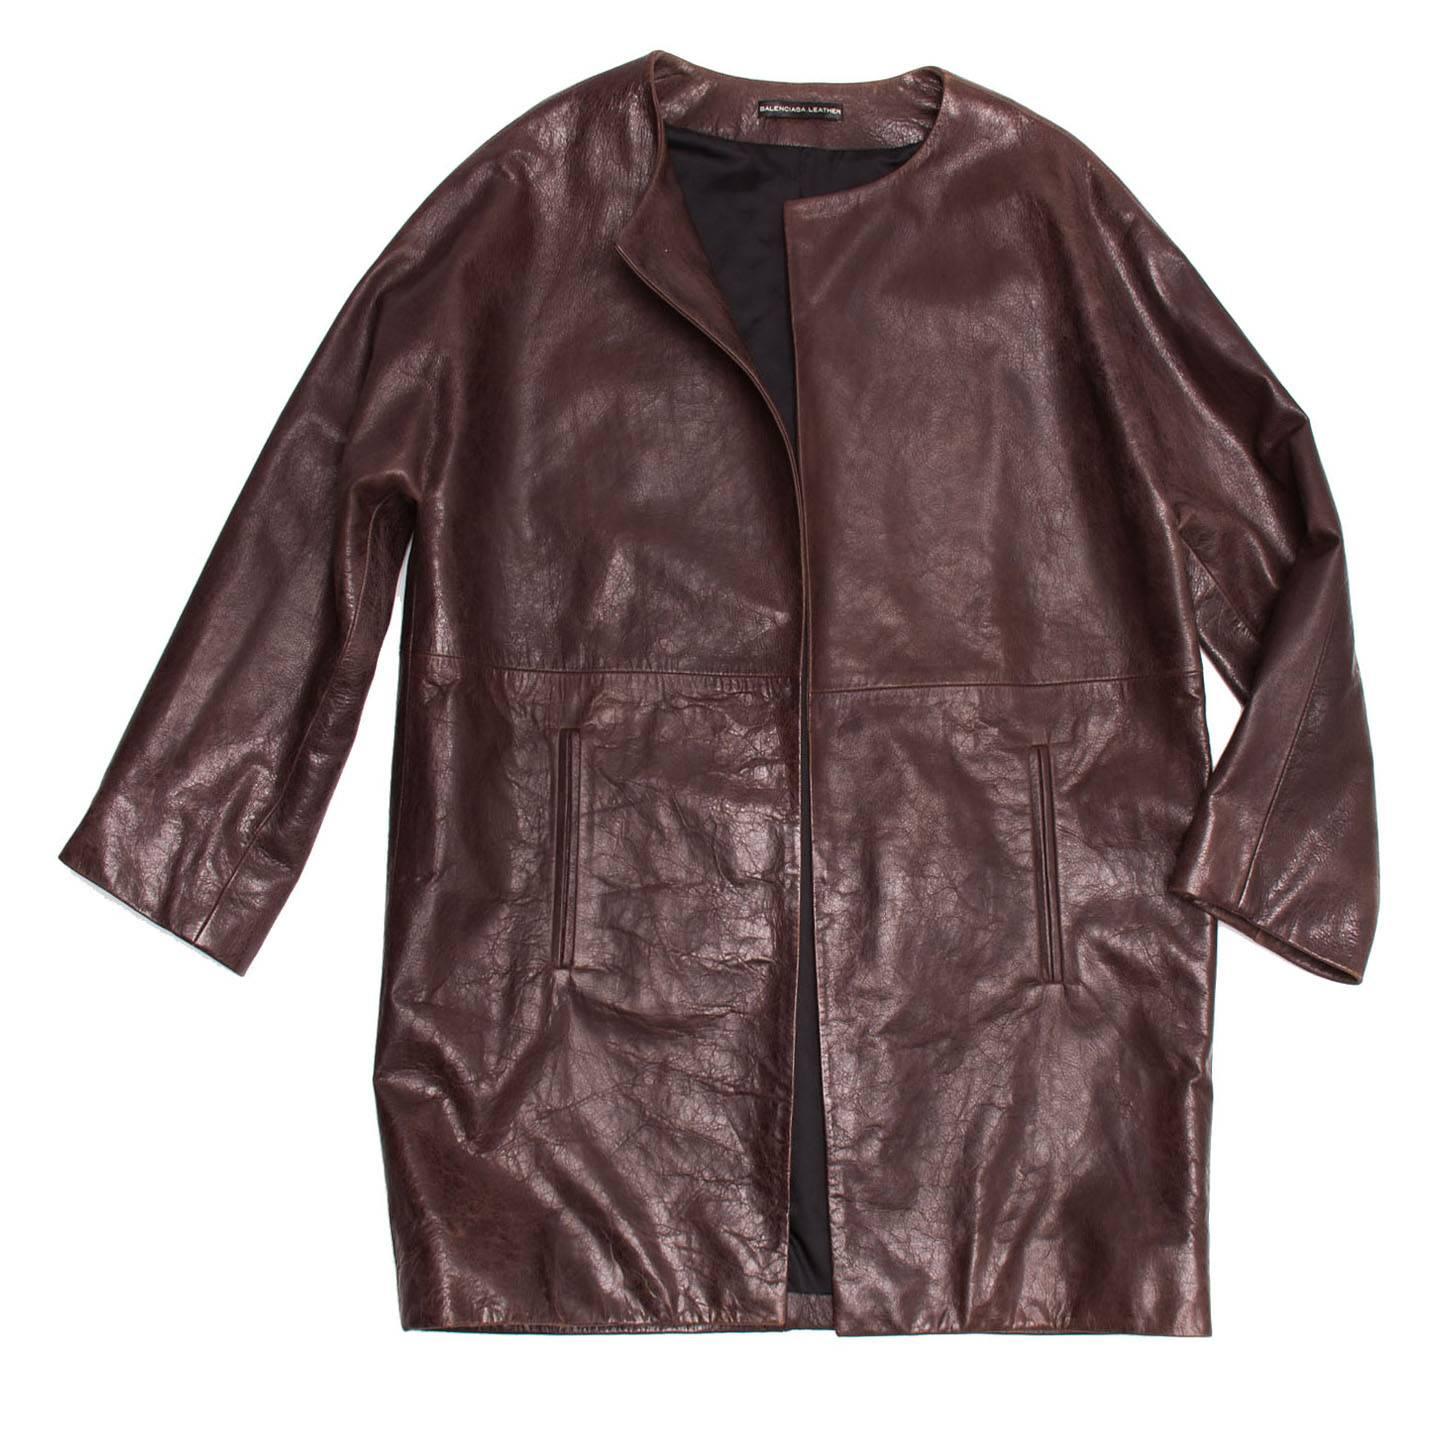 Burgundy lambskin leather coat with round collar and dolman sleeves. The fit is boxy and mid-length; the front is open and buttonless and enriched by two vertical welt pockets at lower waist. Made in France.

Size  42 French sizing

Condition 